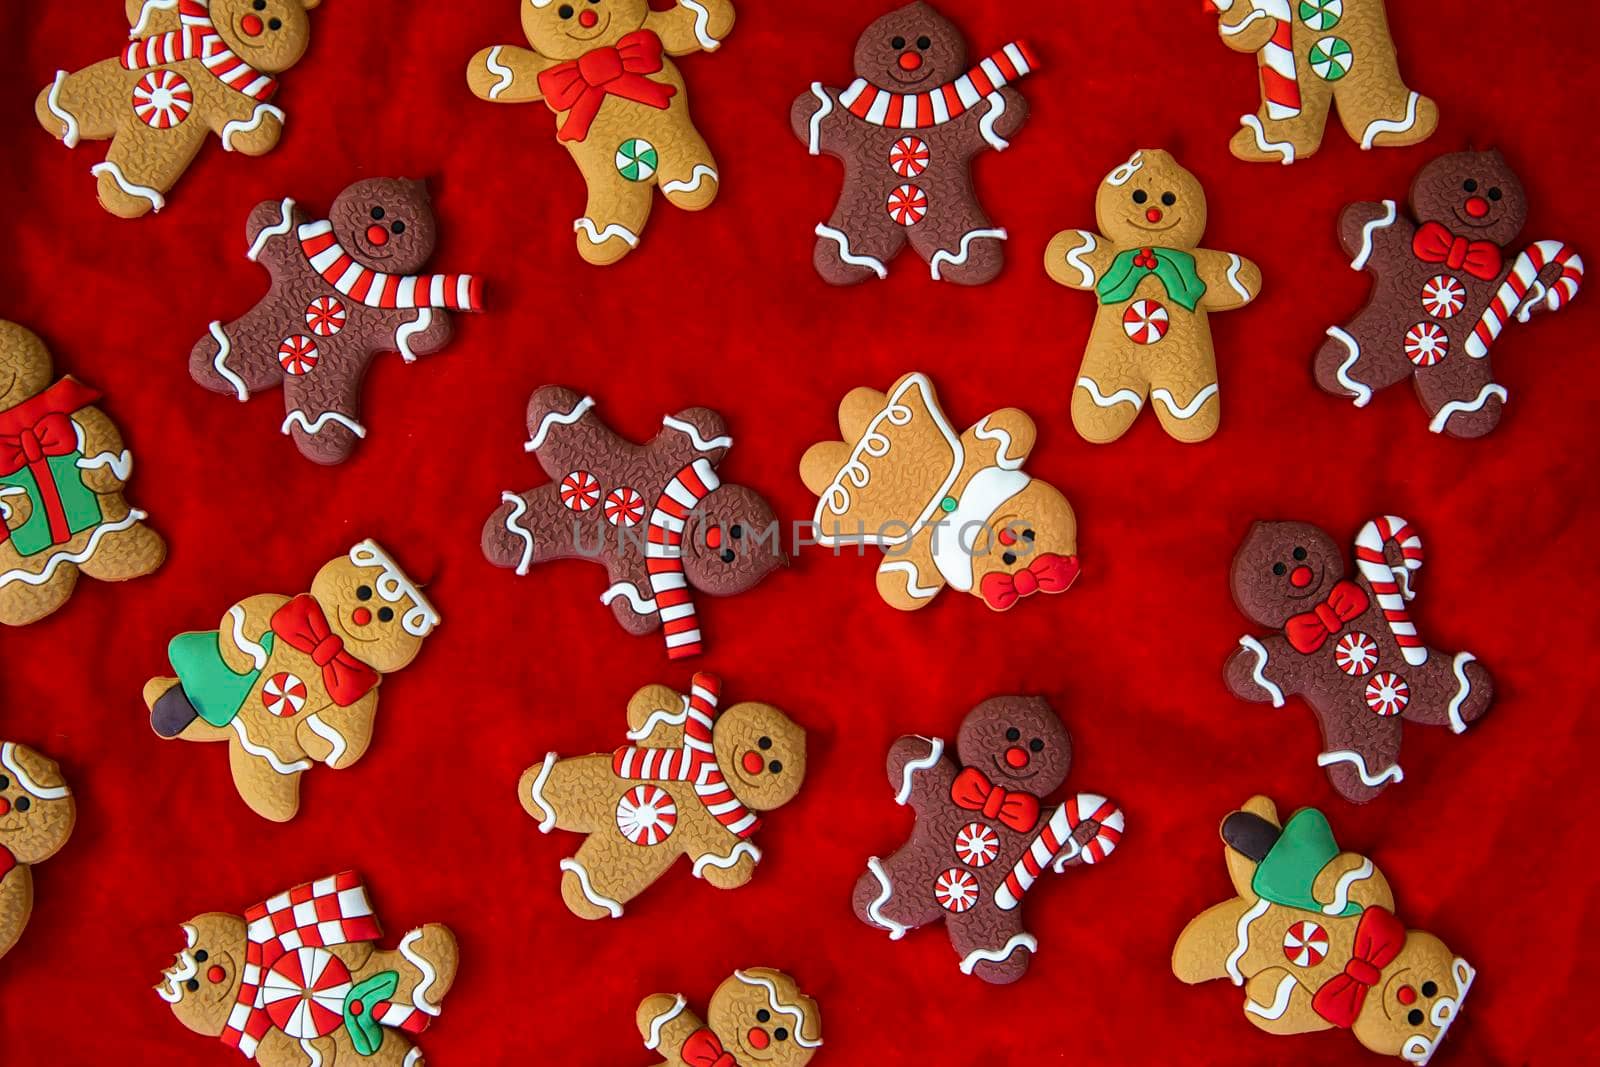 Christmas food. Gingerbread man cookies in Christmas setting. Xmas red background top view retro modern design by Annebel146